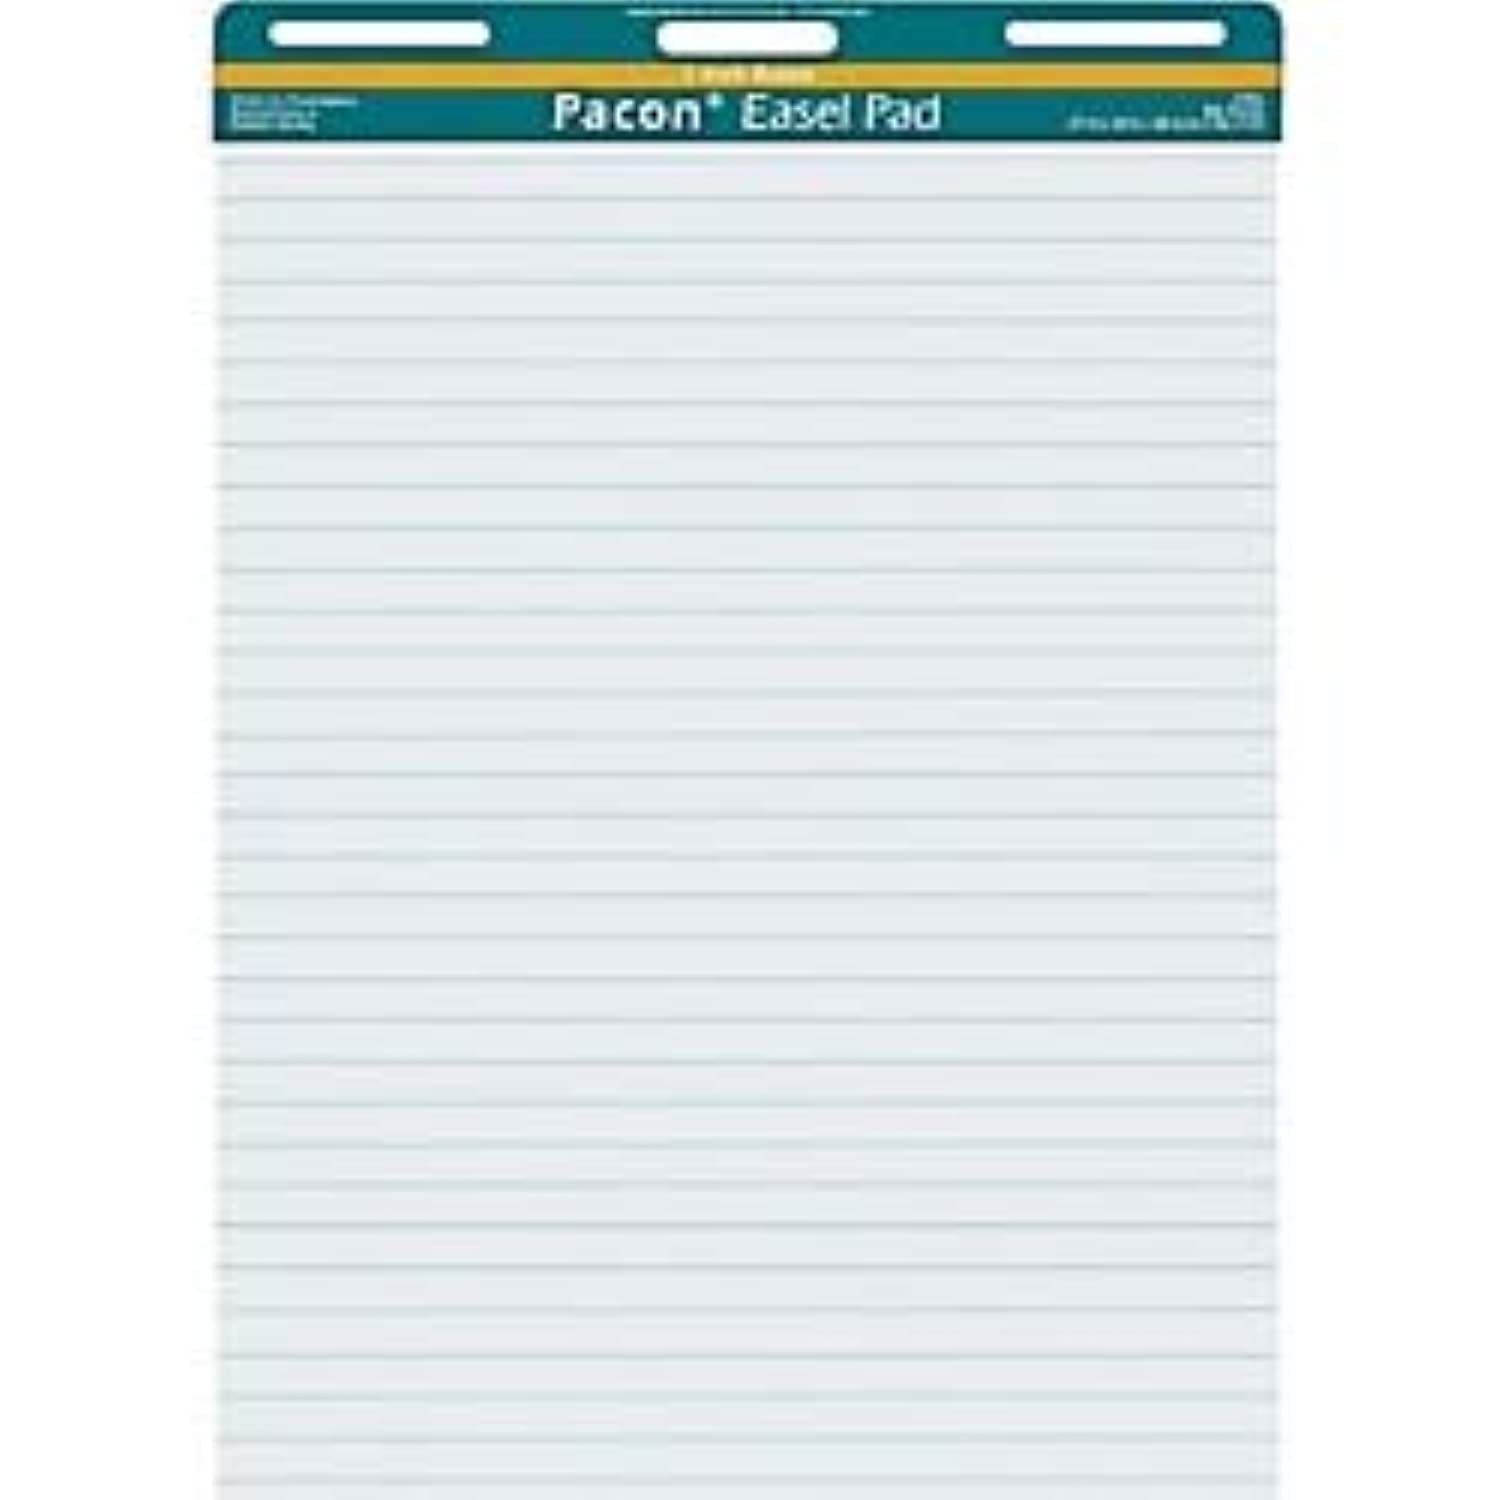 Pacon PAC3386-A1 1" Ruled Easel Pad (50 Sheets), 27" x 34" - $37.99